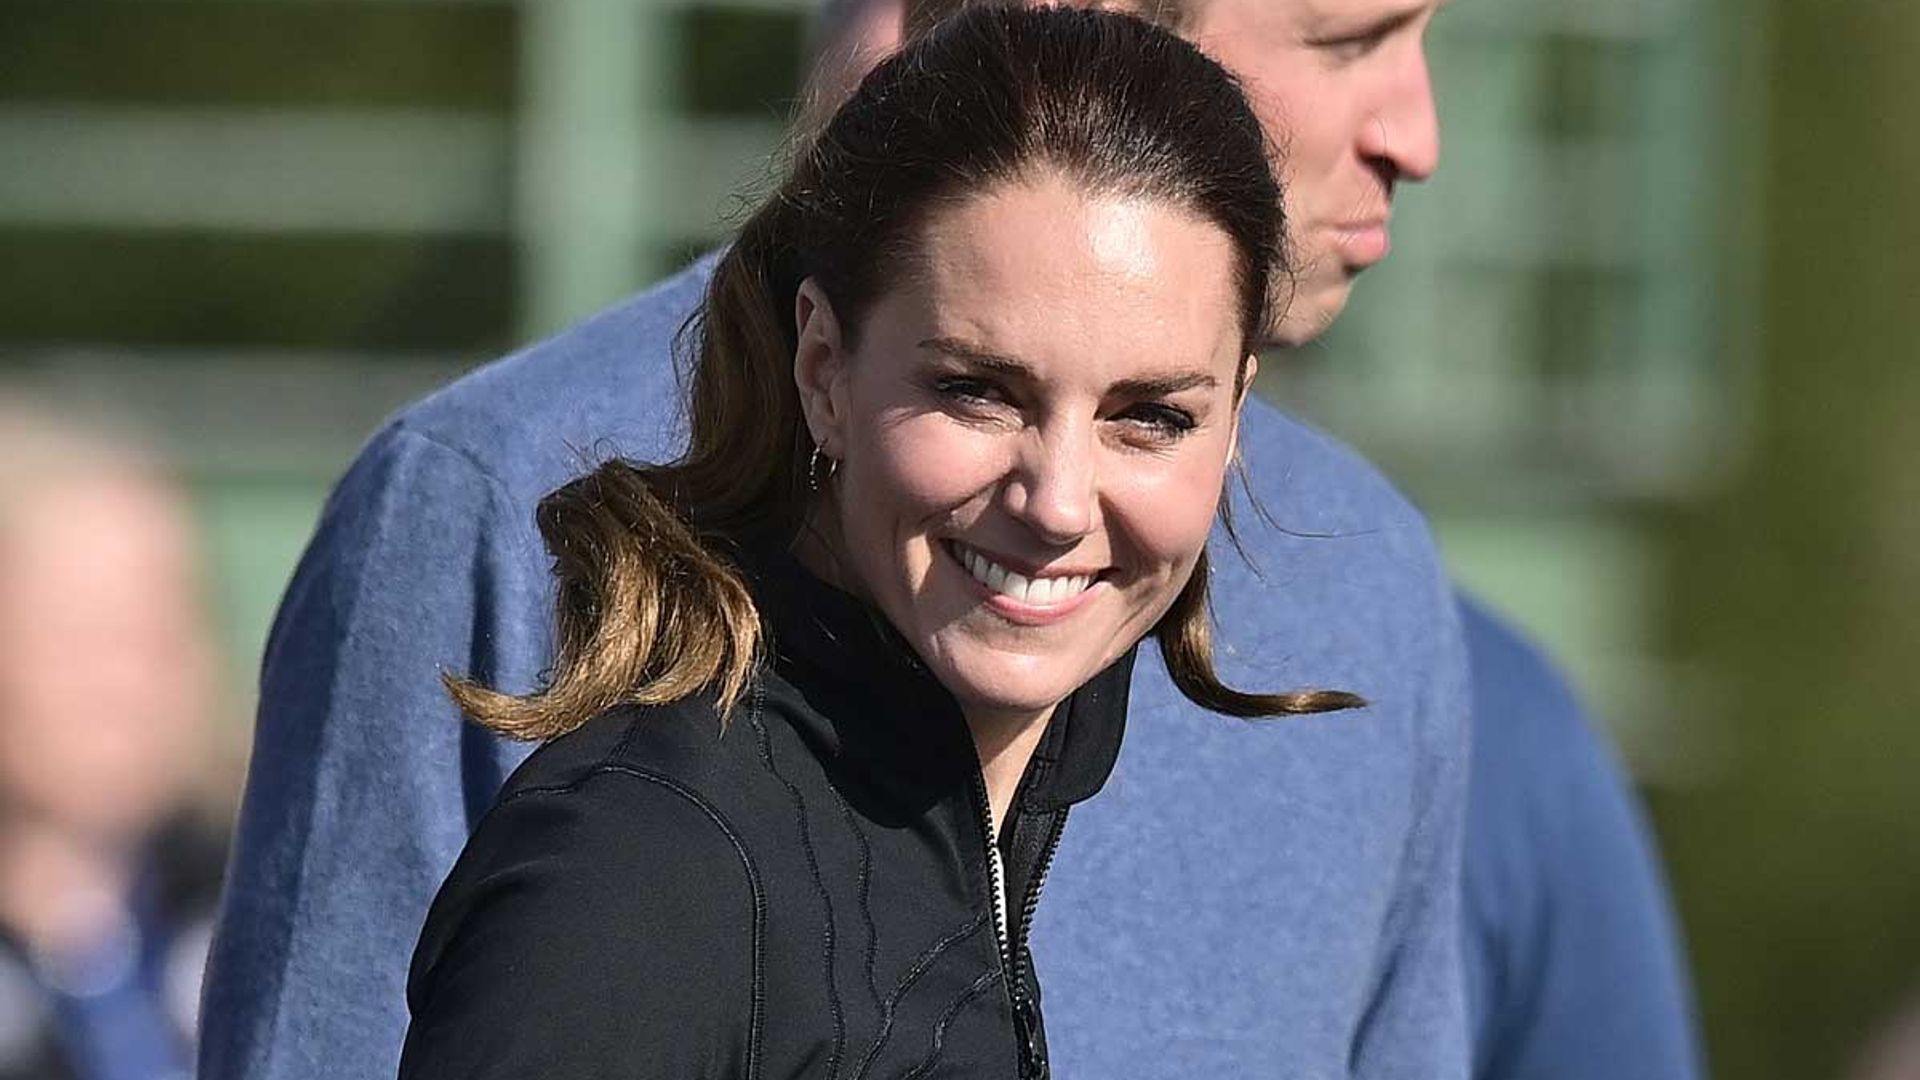 Sporty Kate Middleton changes into sleek activewear to play rugby in ...